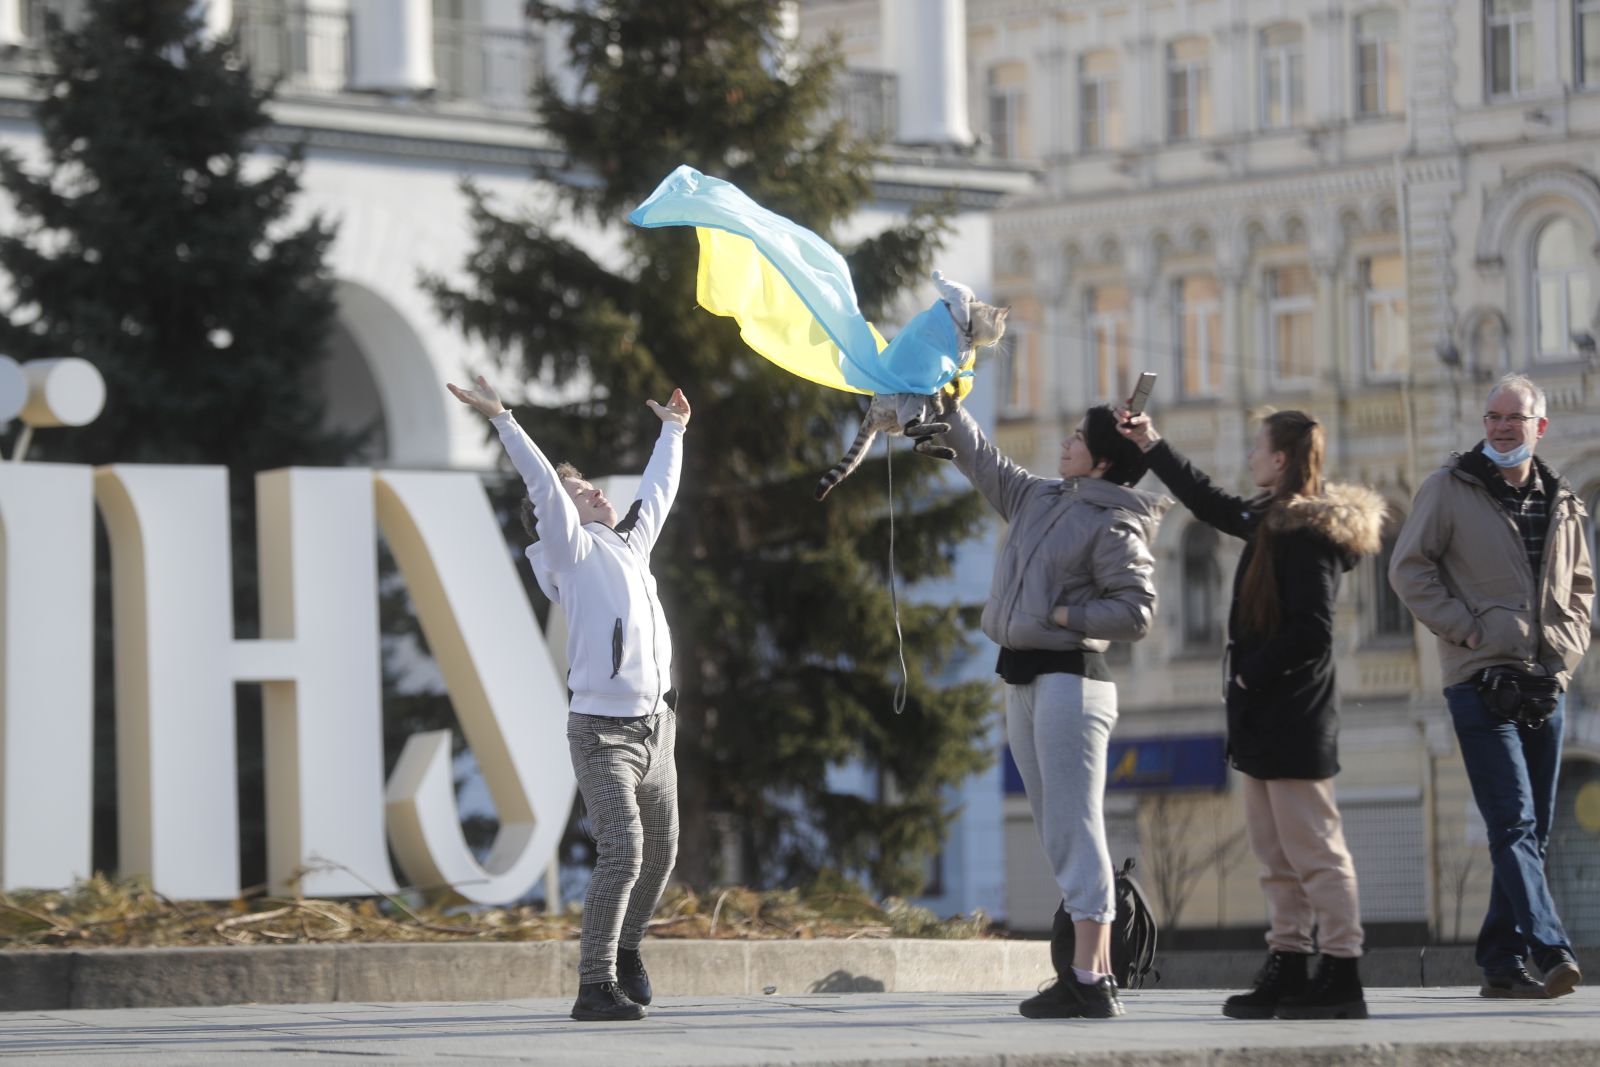 epa09786835 People take photos of a cat wrapped in a Ukrainian flag in Kiev, Ukraine, 26 February 2022. Russian troops launched a major military operation on Ukraine on 24 February, after weeks of intense diplomacy and the imposition of Western sanctions on Russia aimed at preventing an armed conflict in Ukraine. Martial law was introduced in Ukraine, with explosions heard in many cities, including Kiev.  EPA/ZURAB KURTSIKIDZE